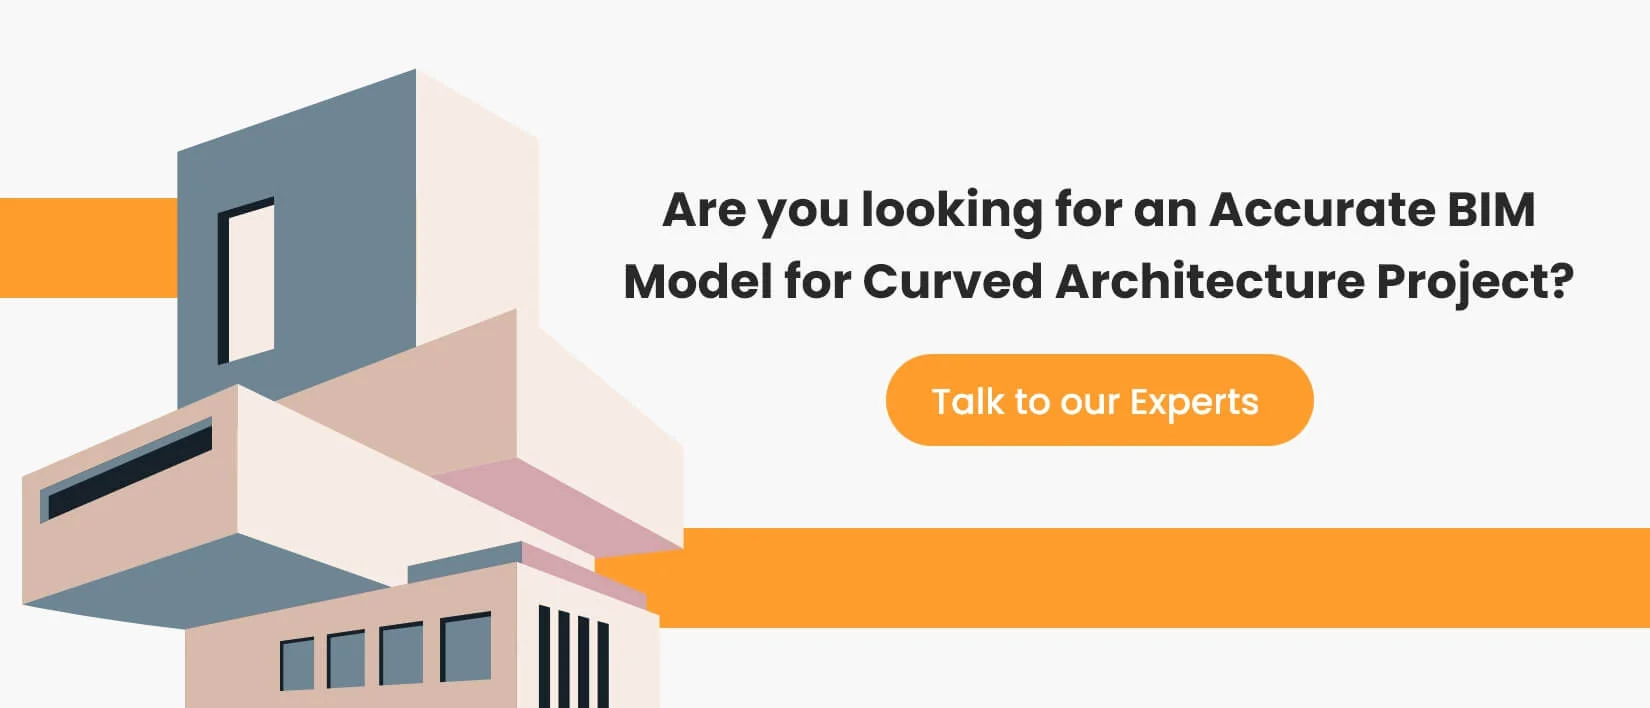 Are you looking for an Accurate BIM Model for Curved Architecture Project